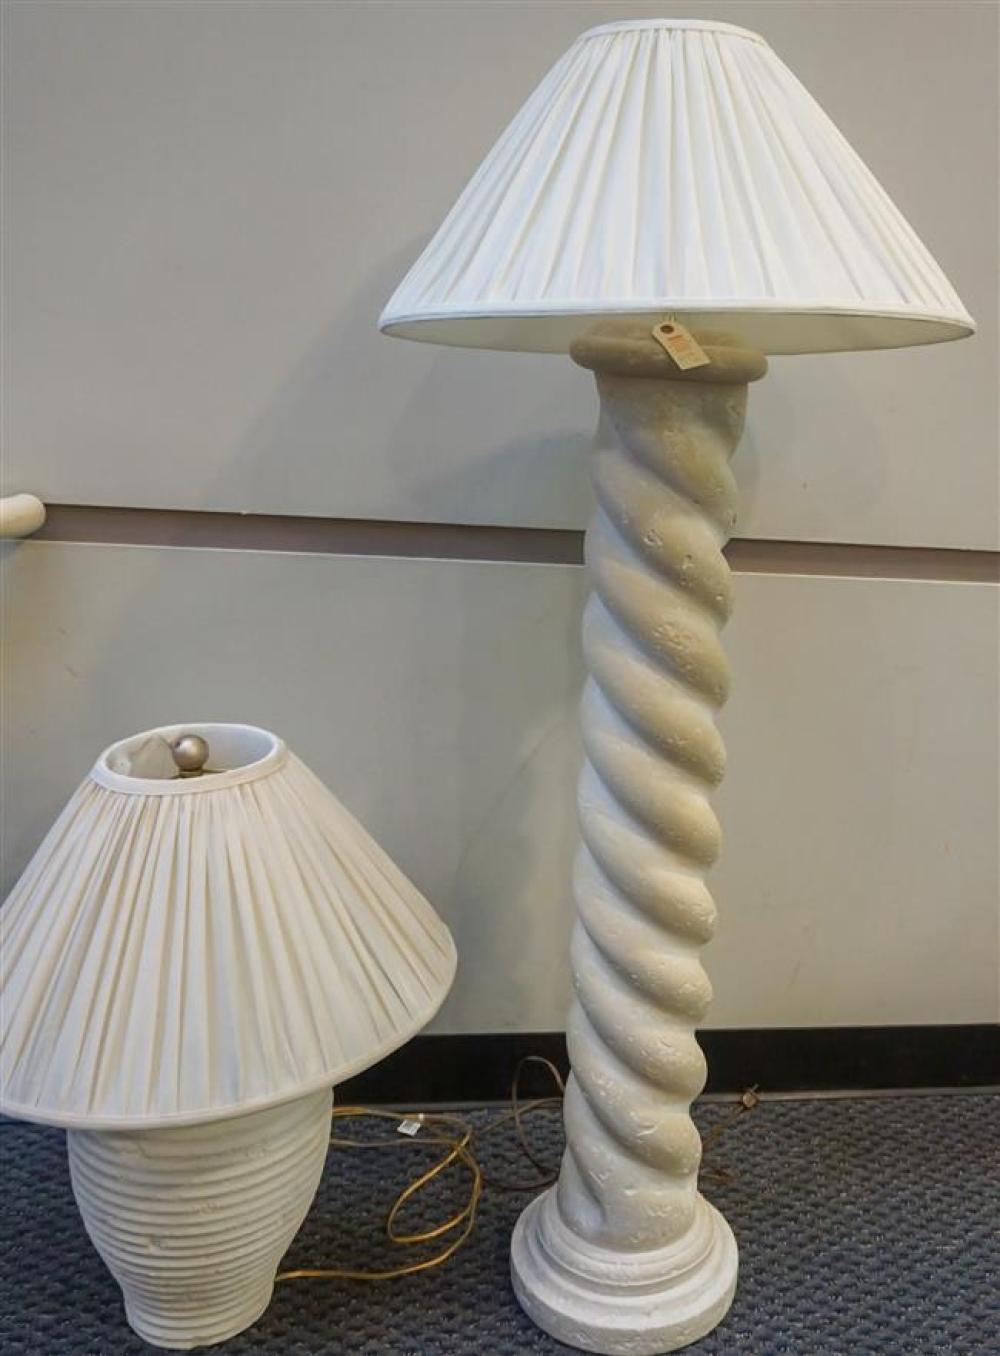 CERAMIC FLOOR LAMP AND A TABLE 321f85